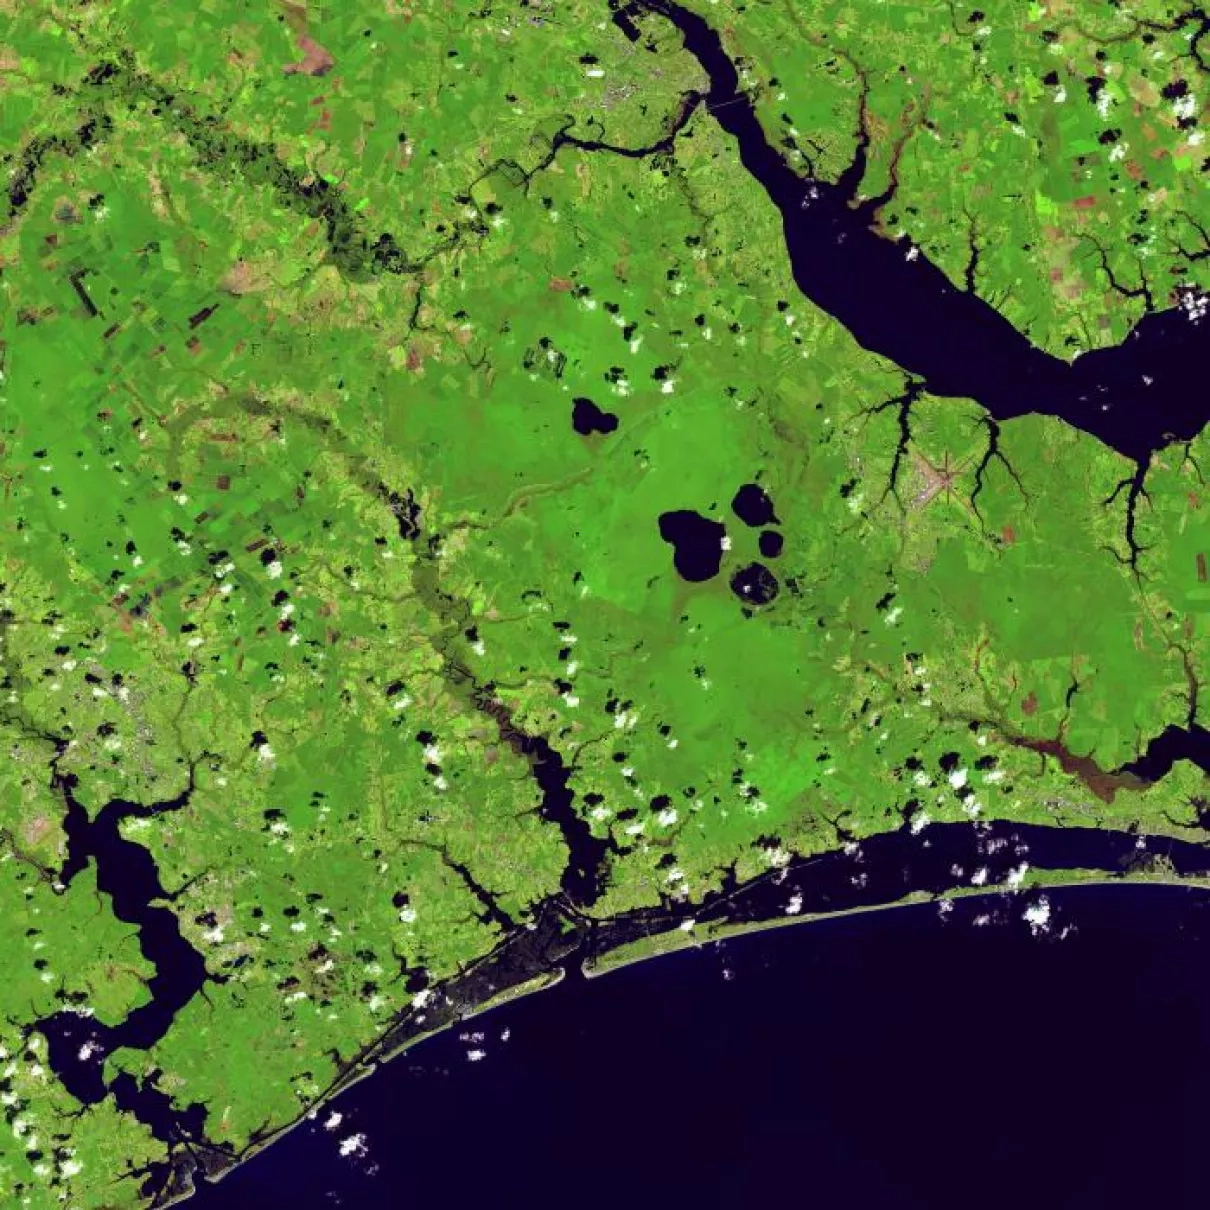 imagery of devastating flooding in the Carolinas from Hurricane Florence